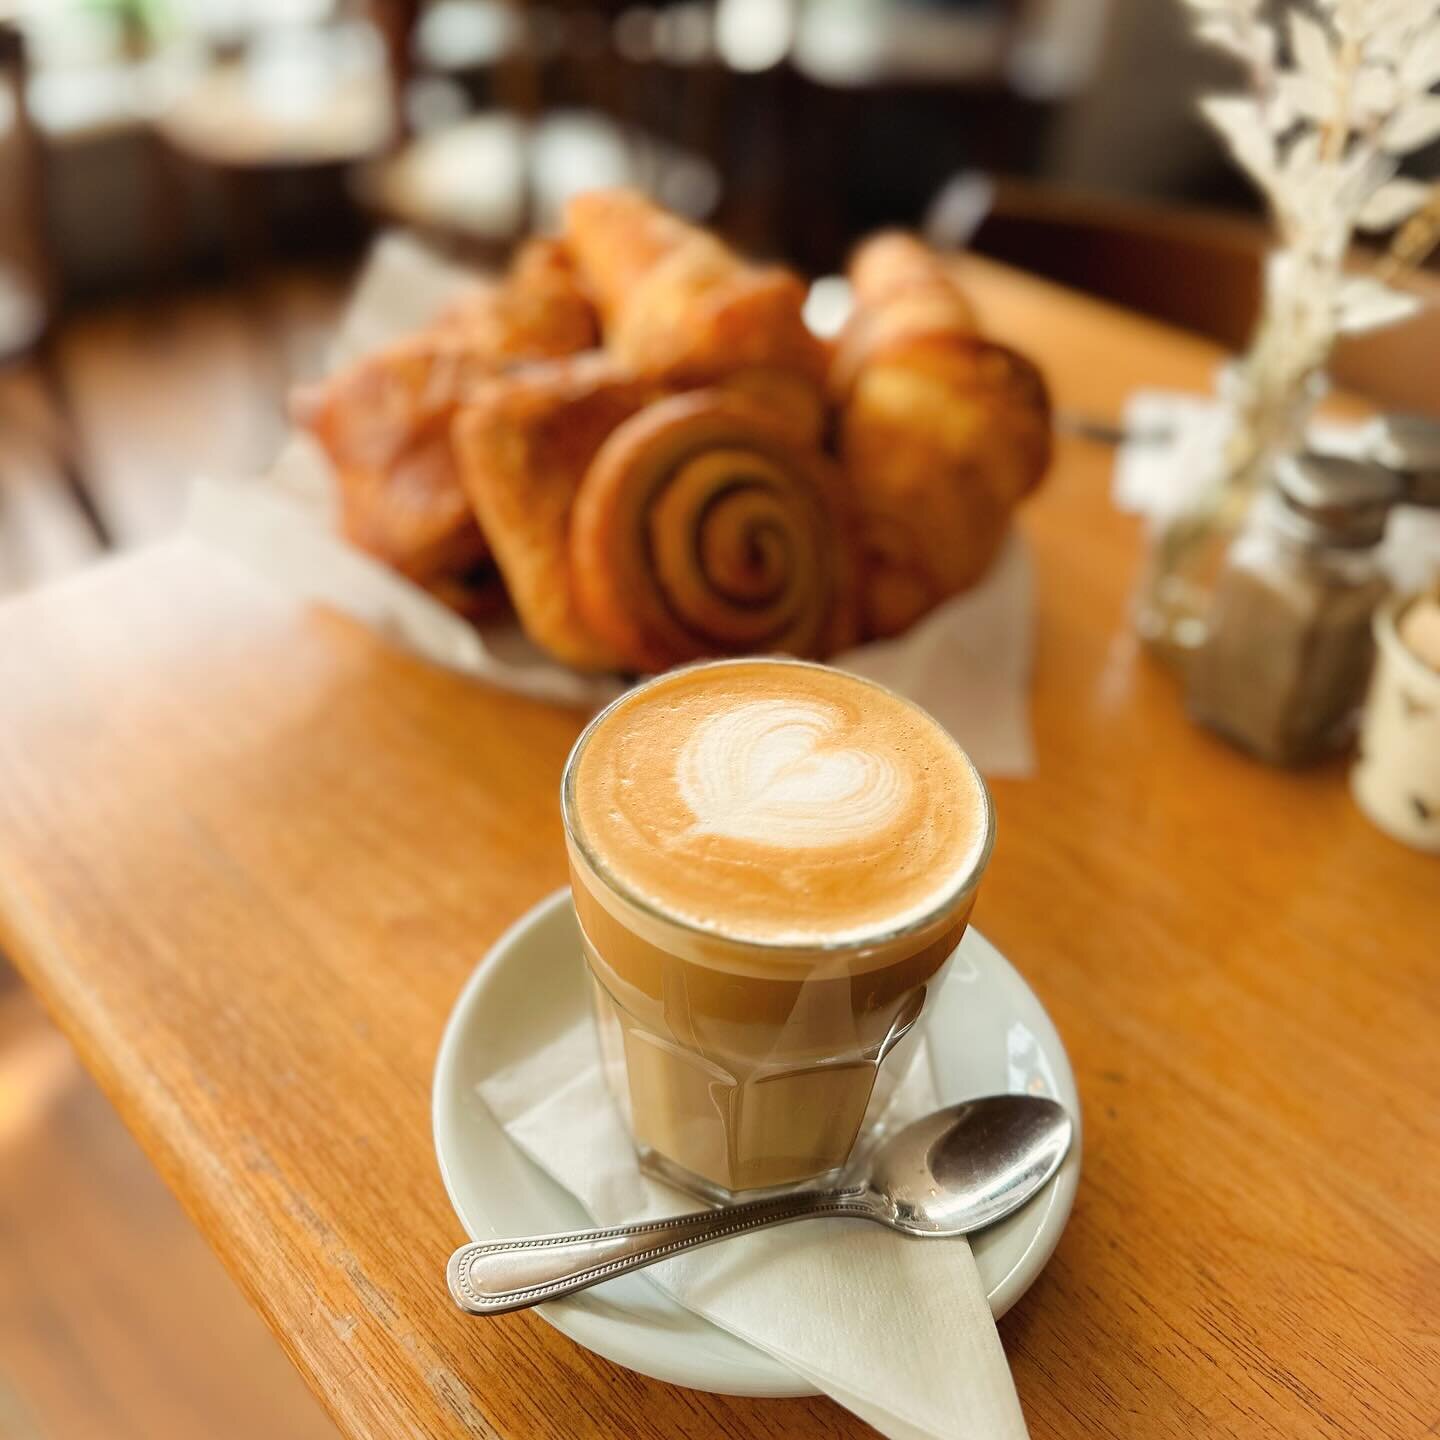 A perfect Sunday starts with a coffee and a fresh baked pastry in a cosy and welcoming Italian cafe ☕️🥰🥐 We&rsquo;re waiting for you 🤗